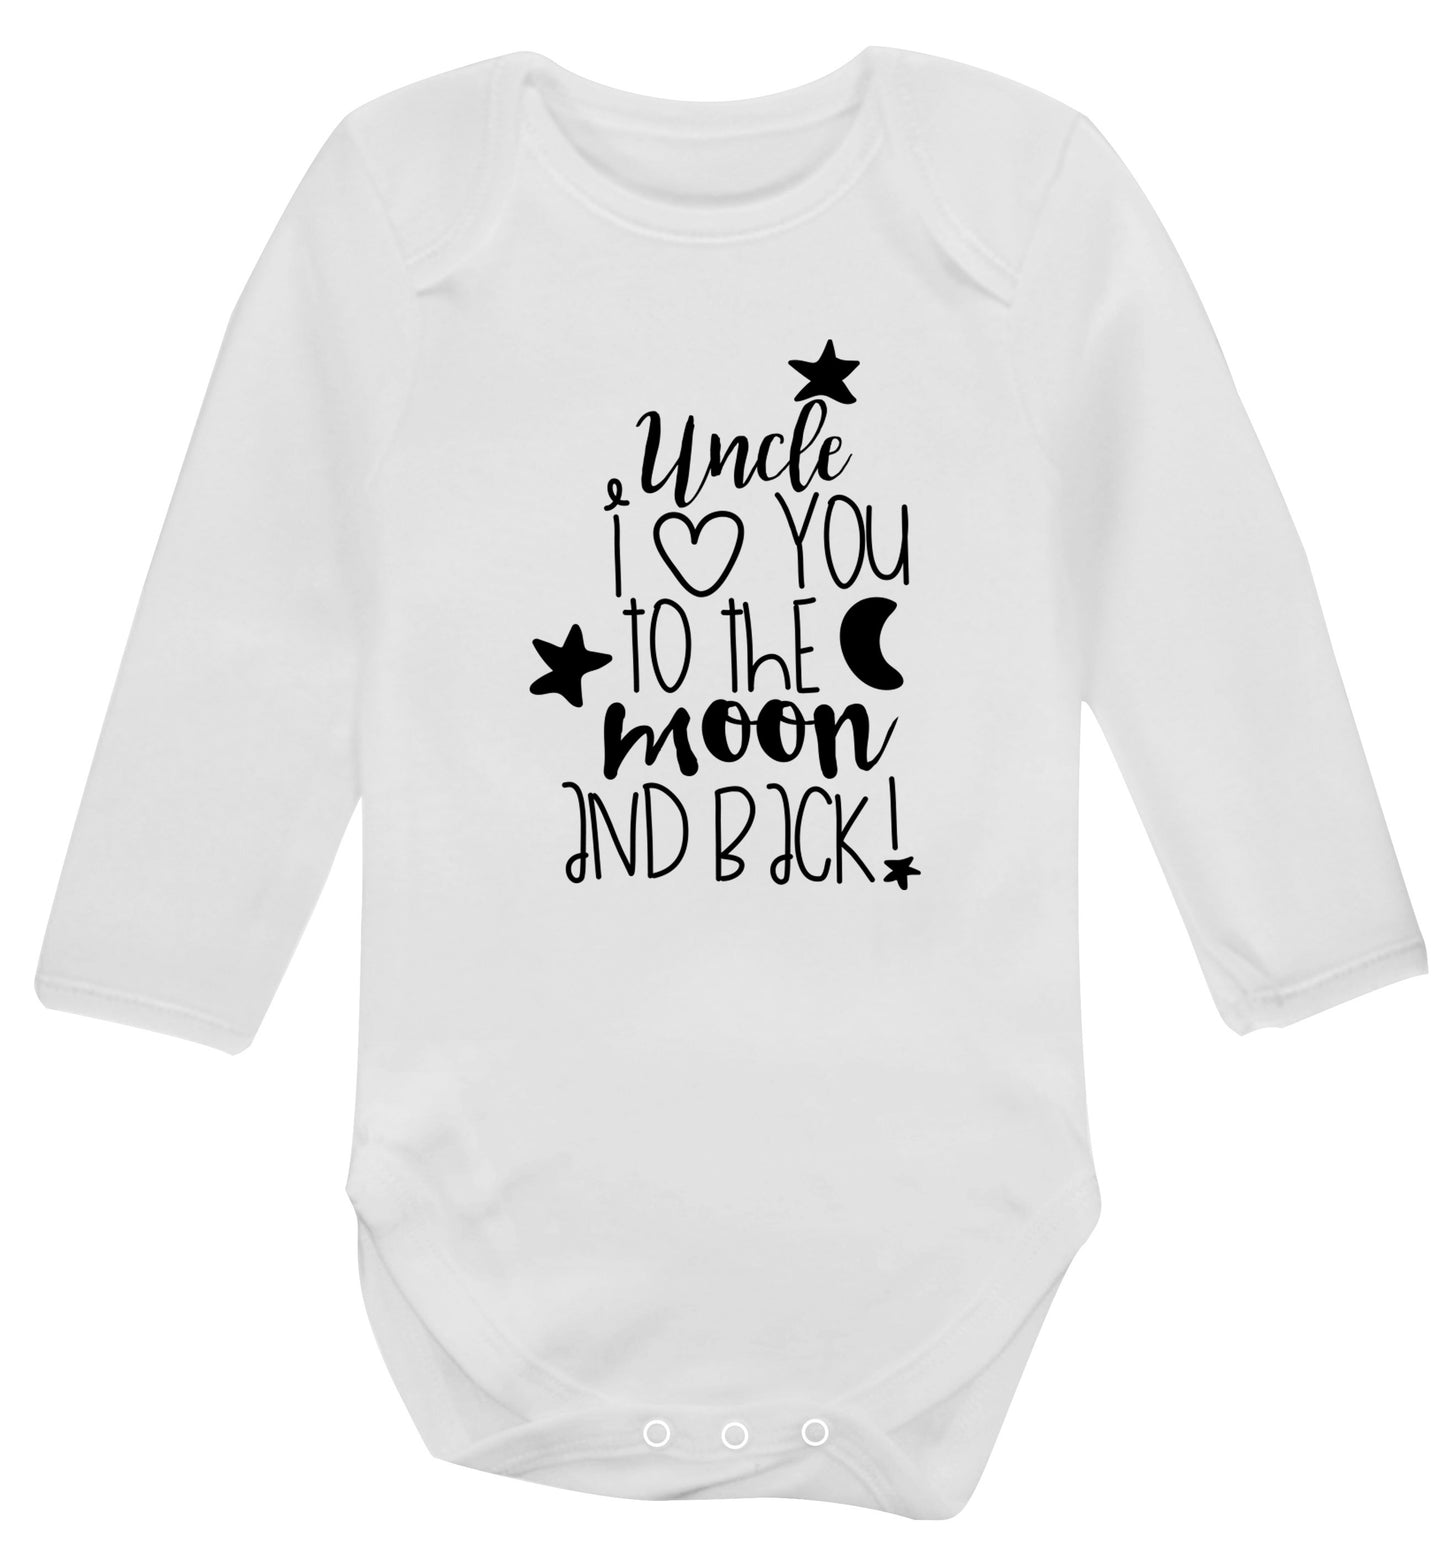 Uncle I love you to the moon and back Baby Vest long sleeved white 6-12 months